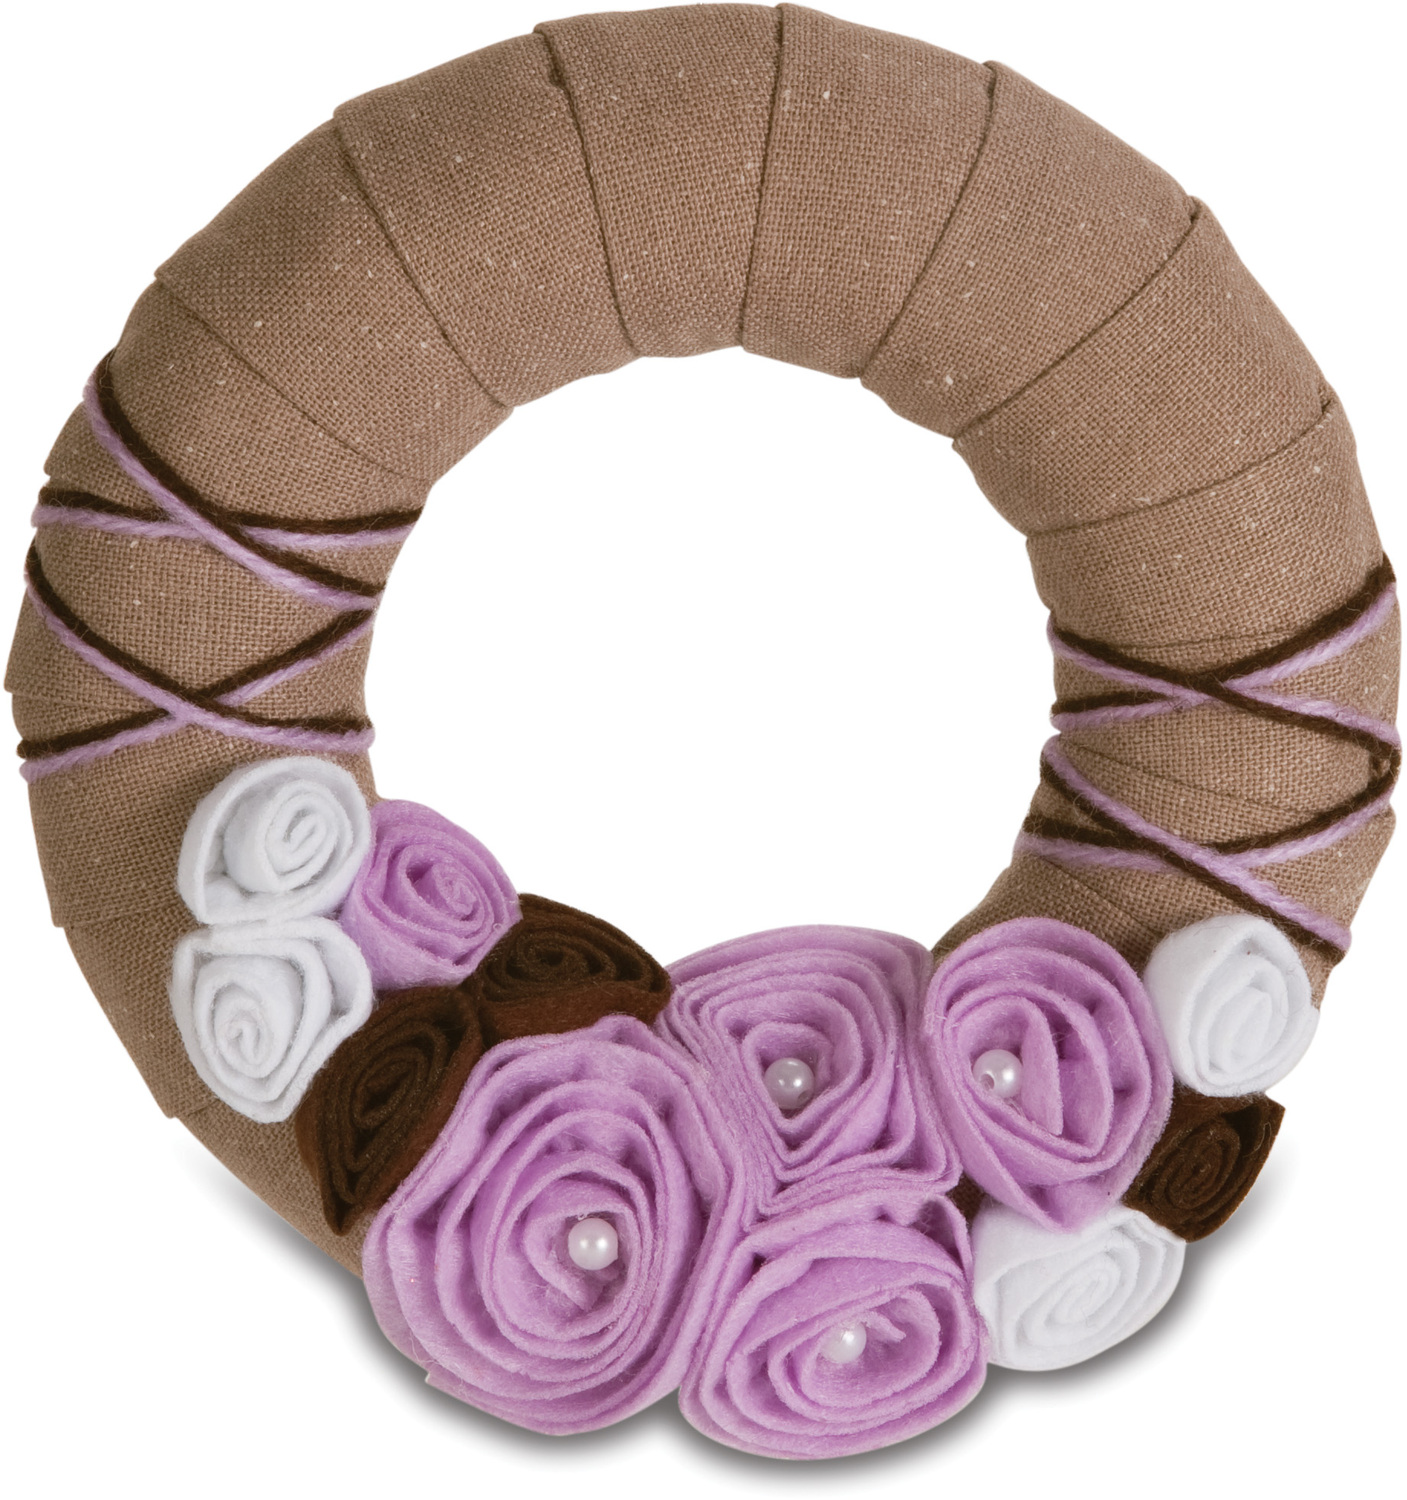 Lavender by Signs of Happiness - Lavender - 6" Wreath